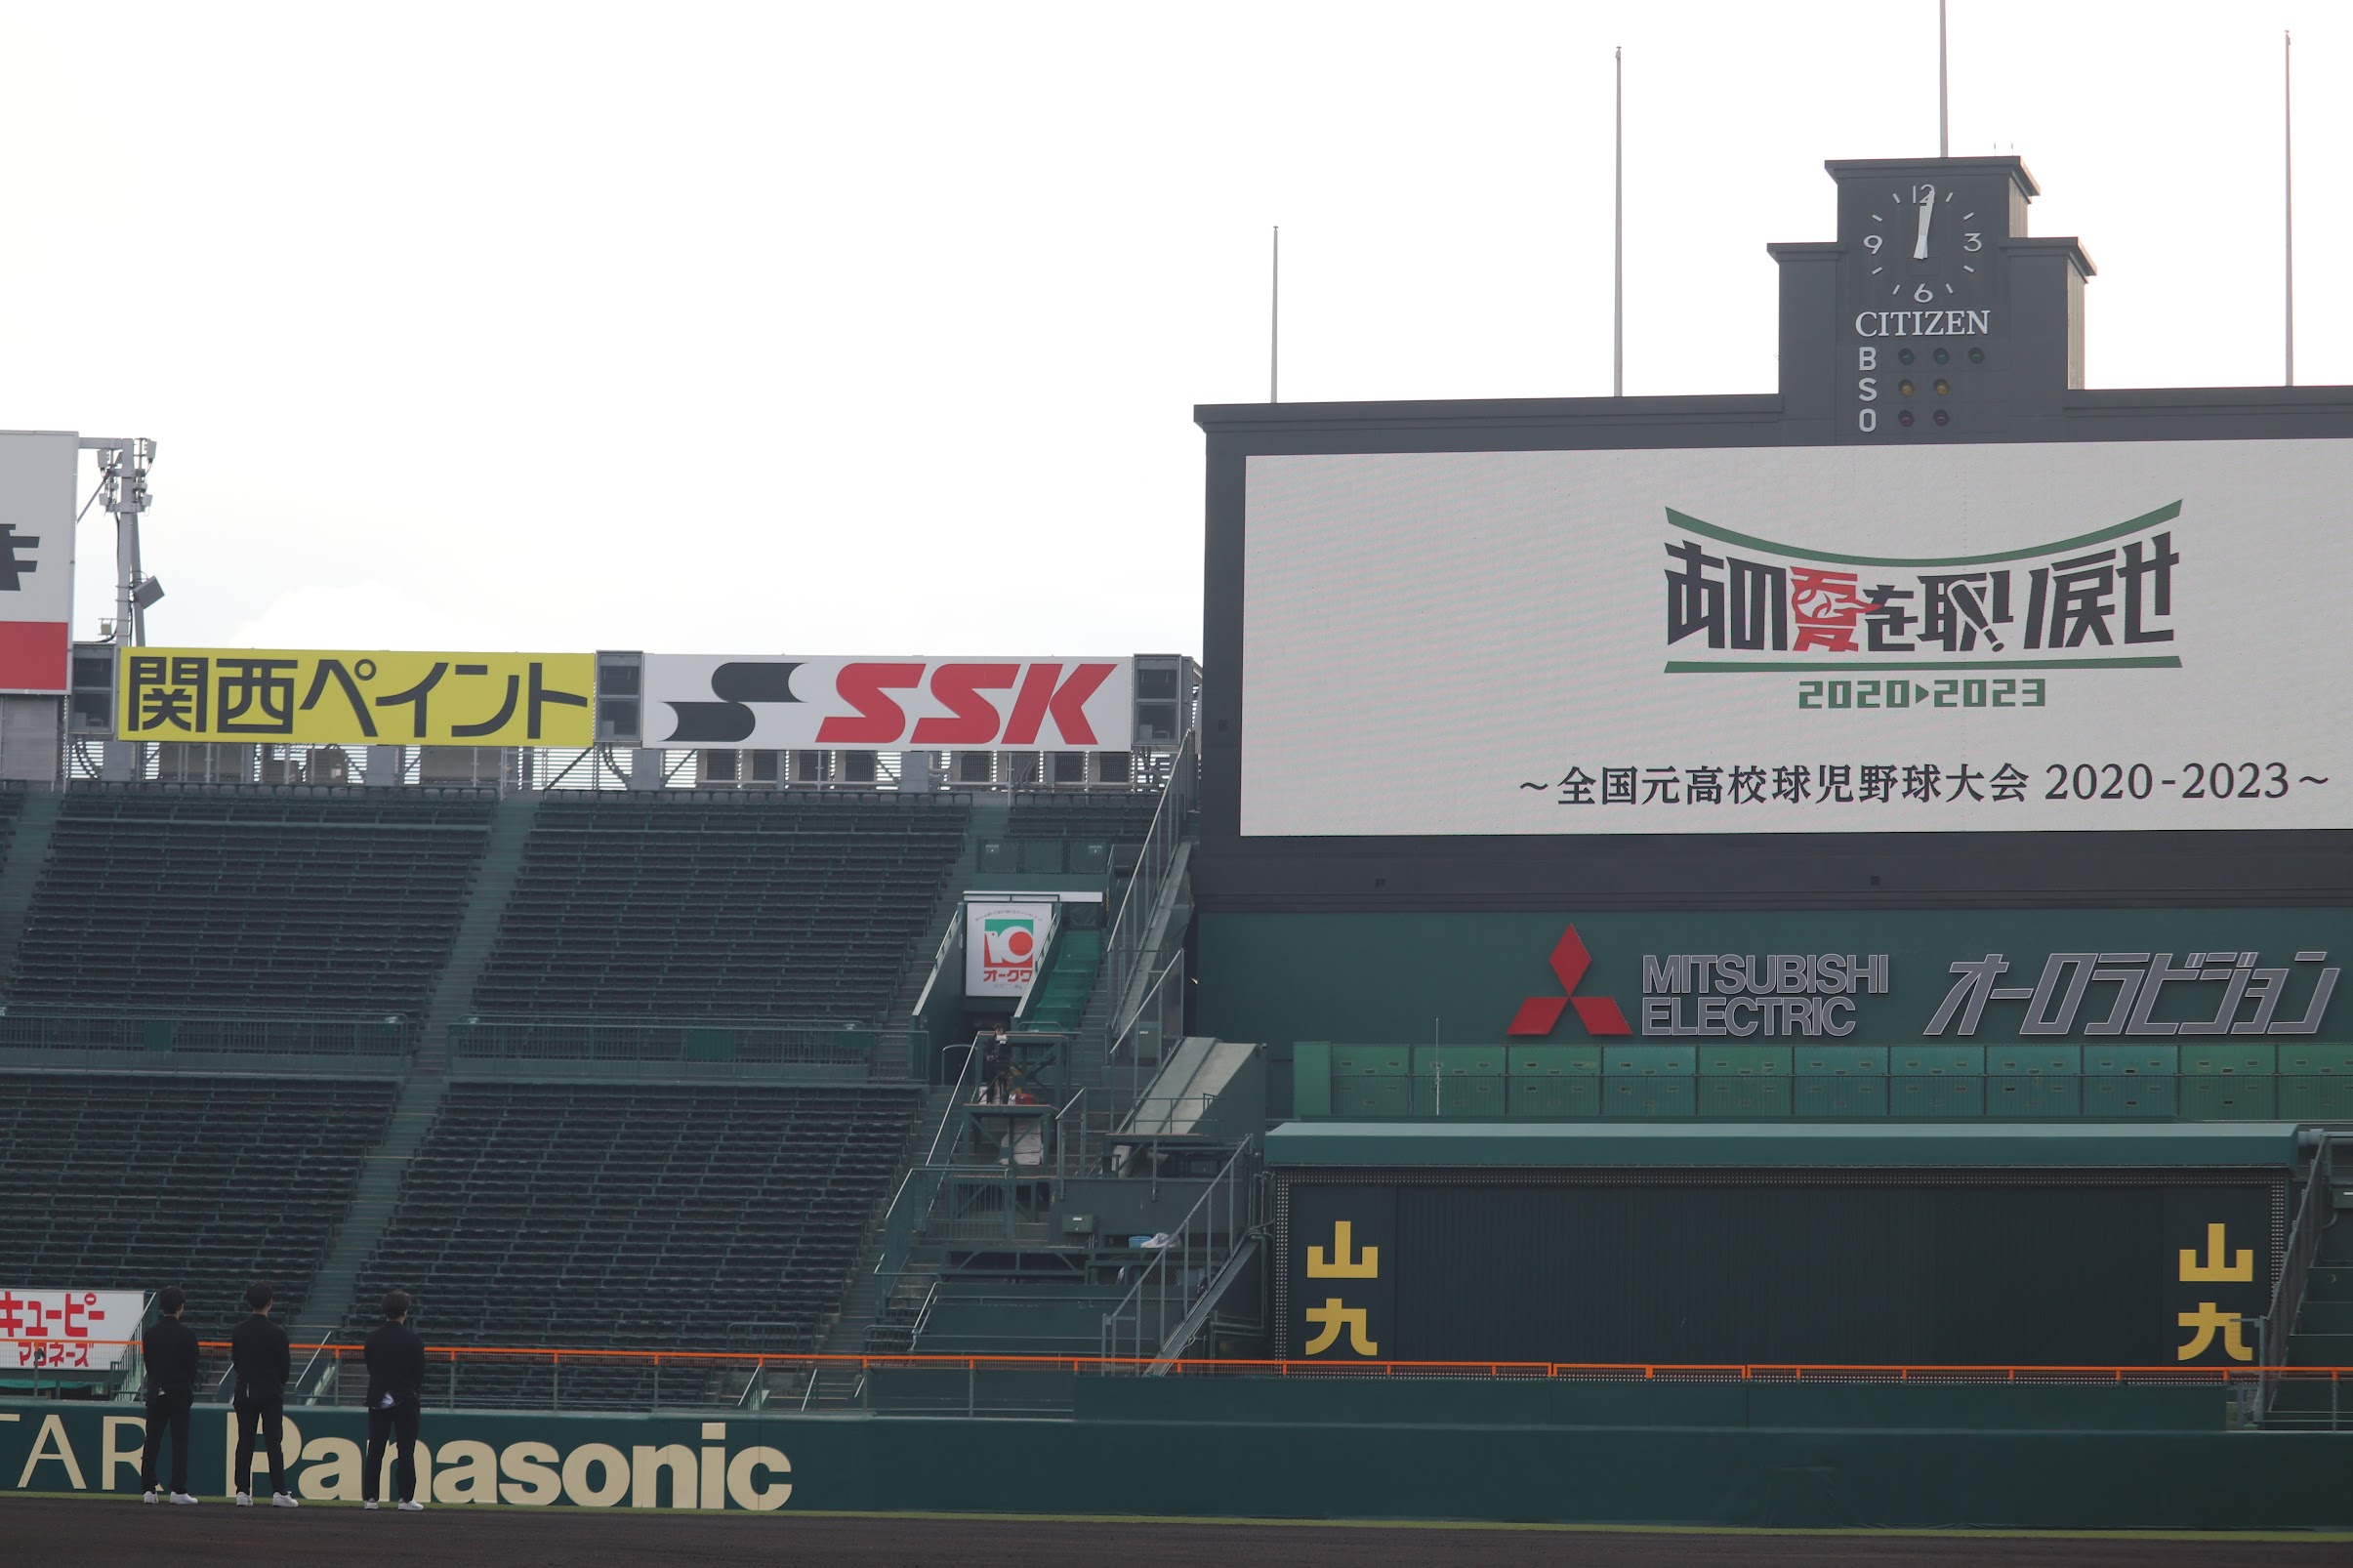 The long-awaited Koshien Tournament for three years, finally took place!